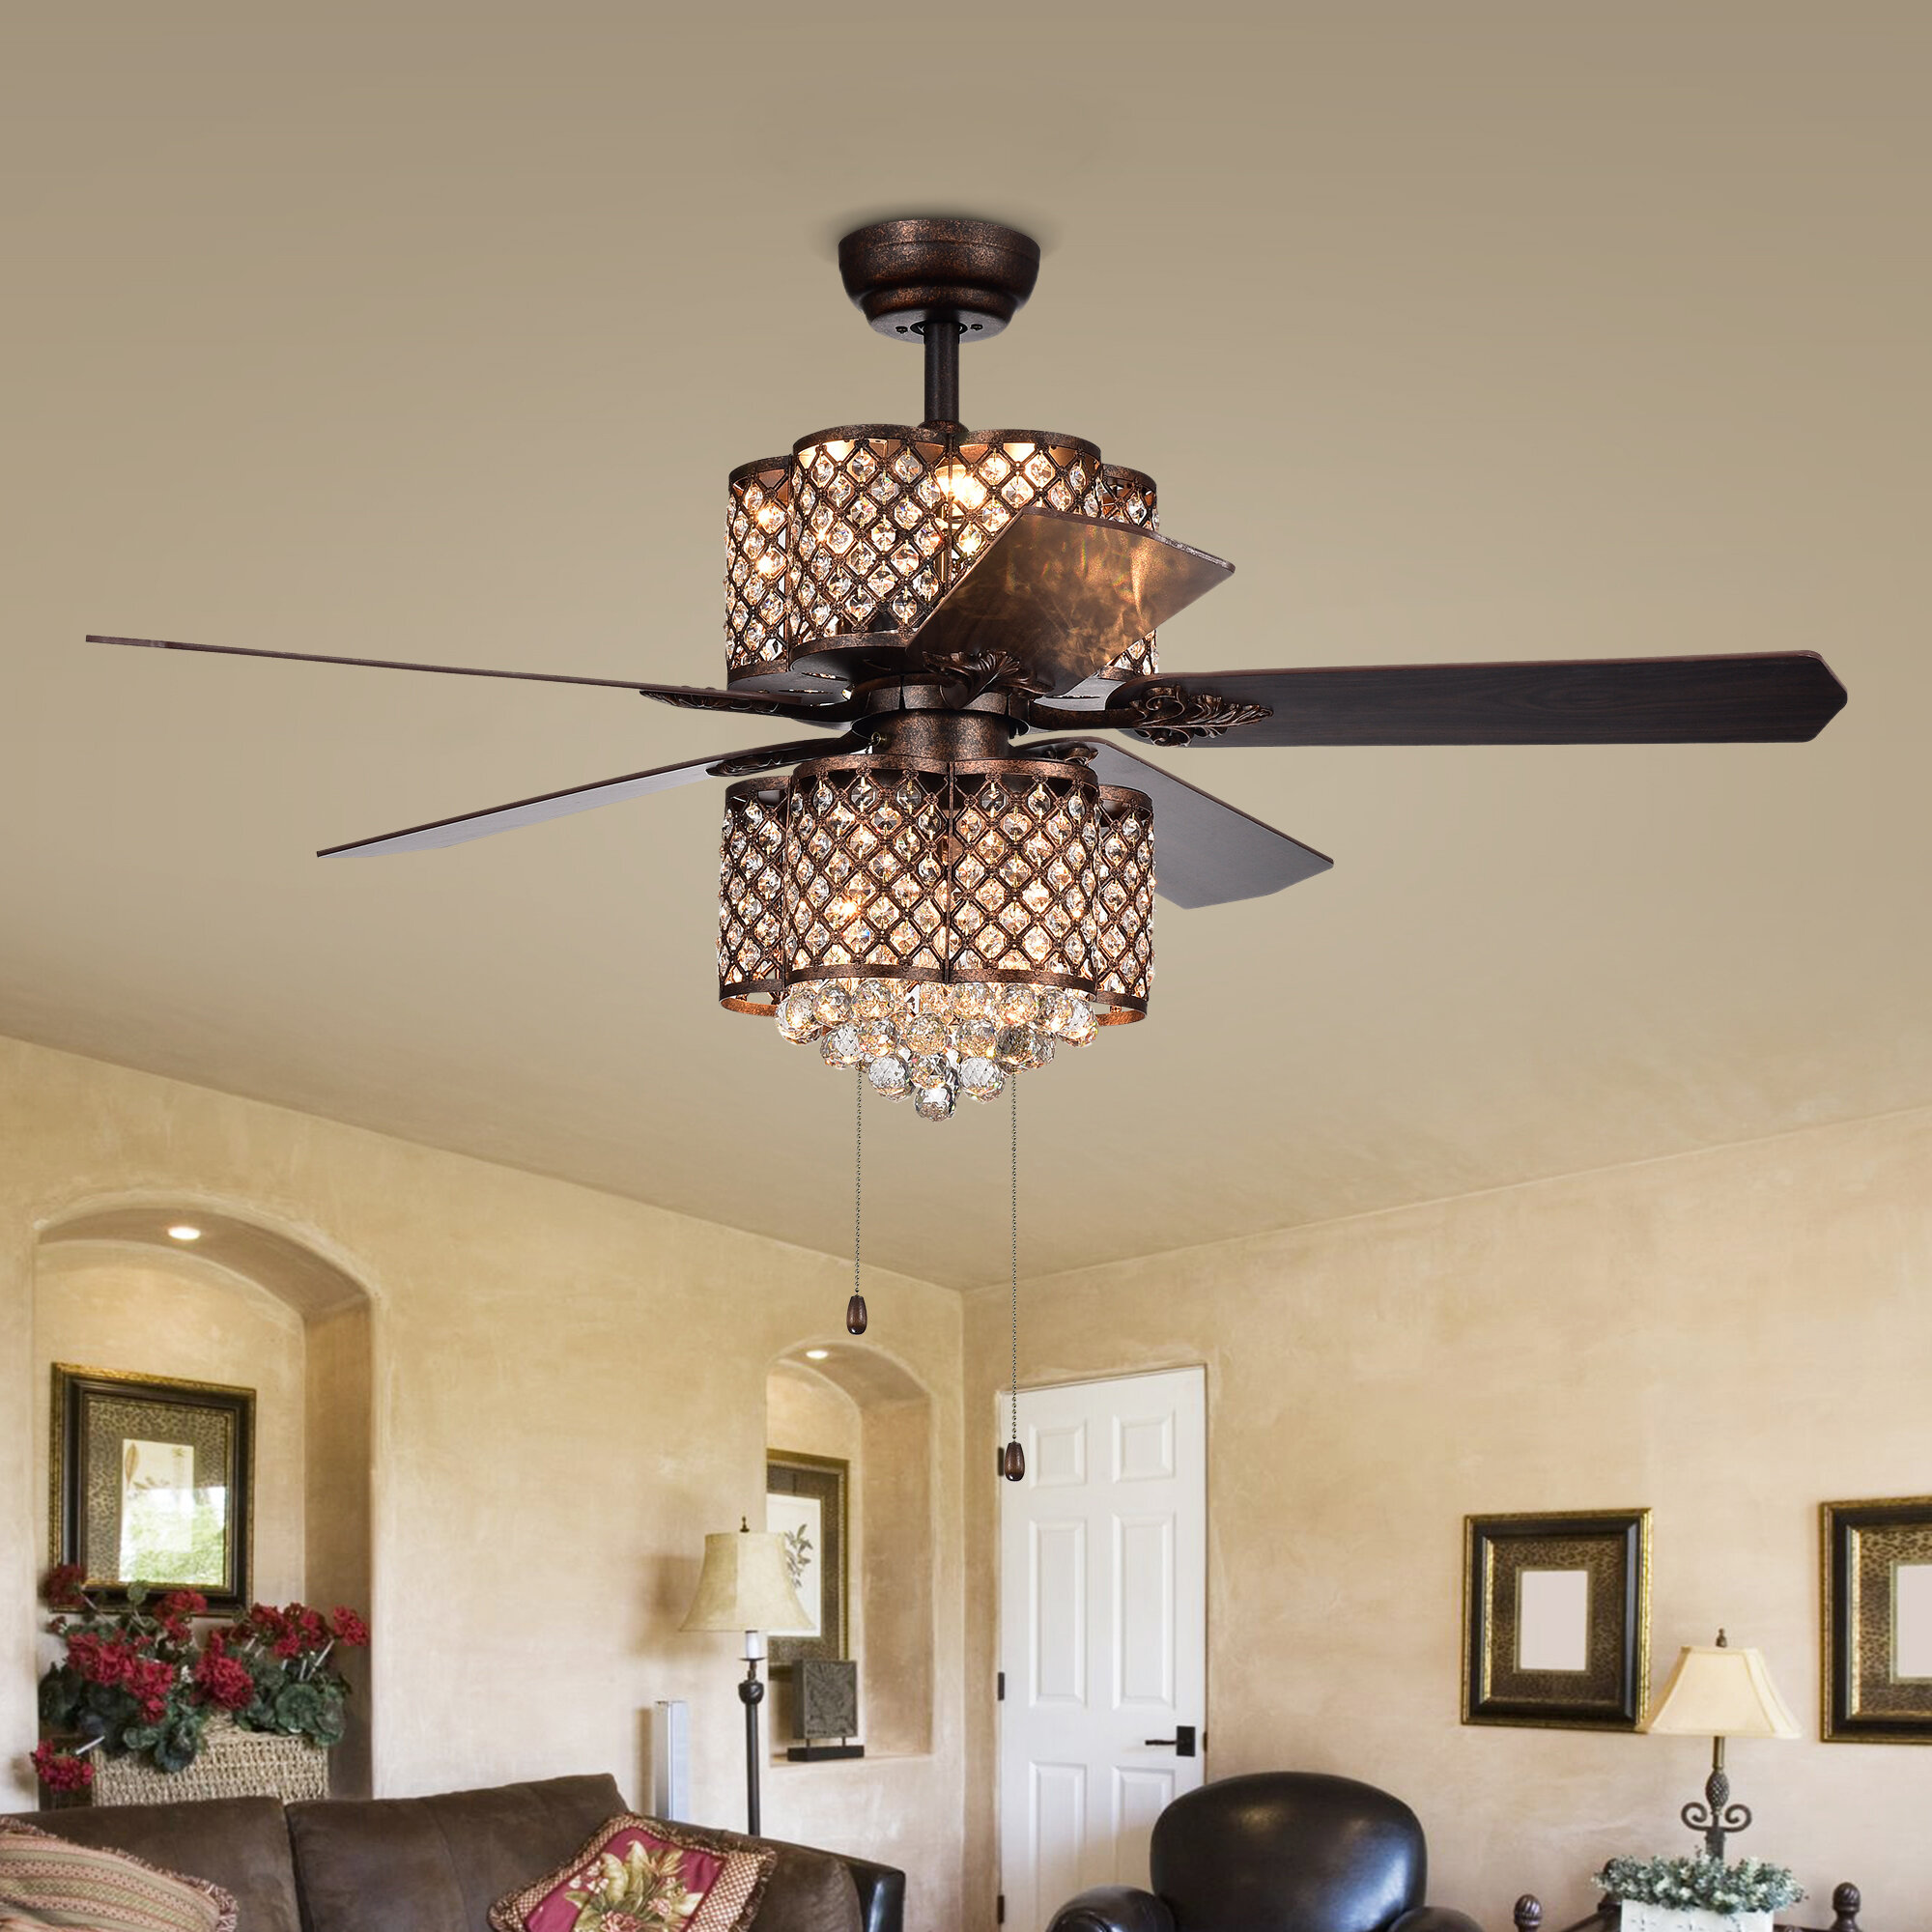 House Of Hampton 15 Adne 5 Blade Crystal Ceiling Fan With Pull Chain And Light Kit Included Reviews Wayfair